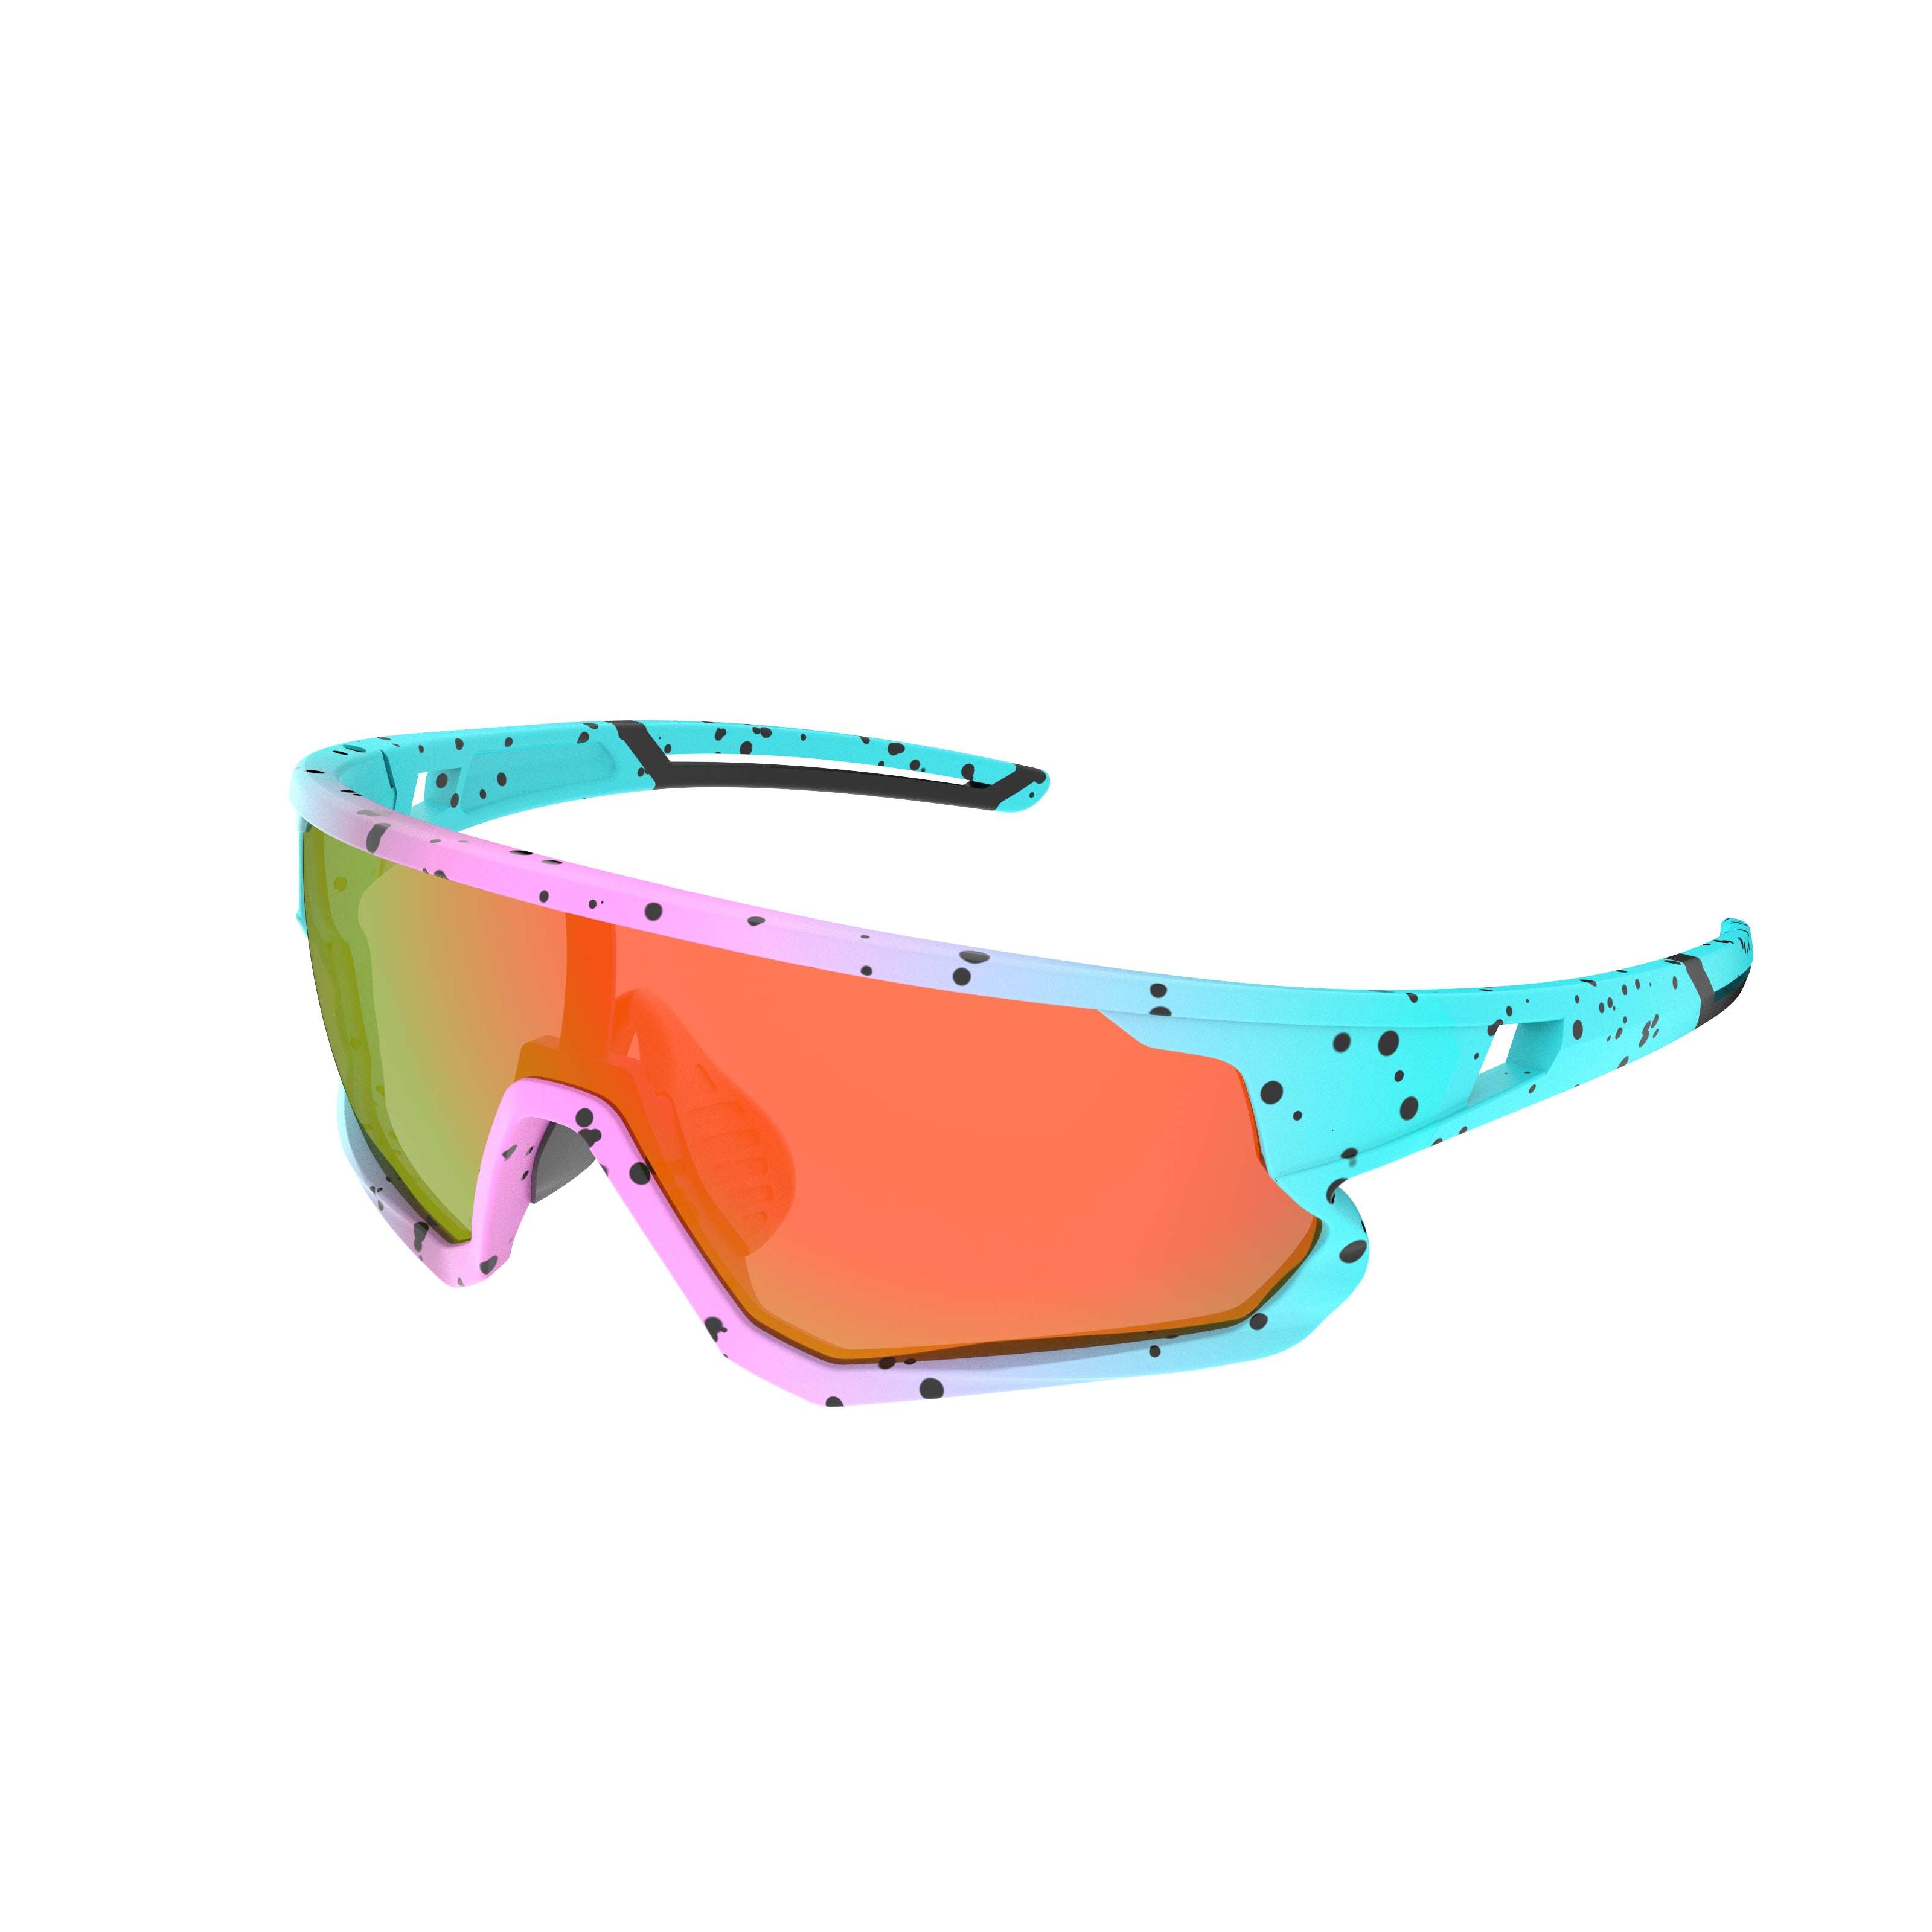 Polarized Cycling Glasses,Sports Sunglasses for Men and Women, UV Protection Glasses for Running, Fishing, Driving